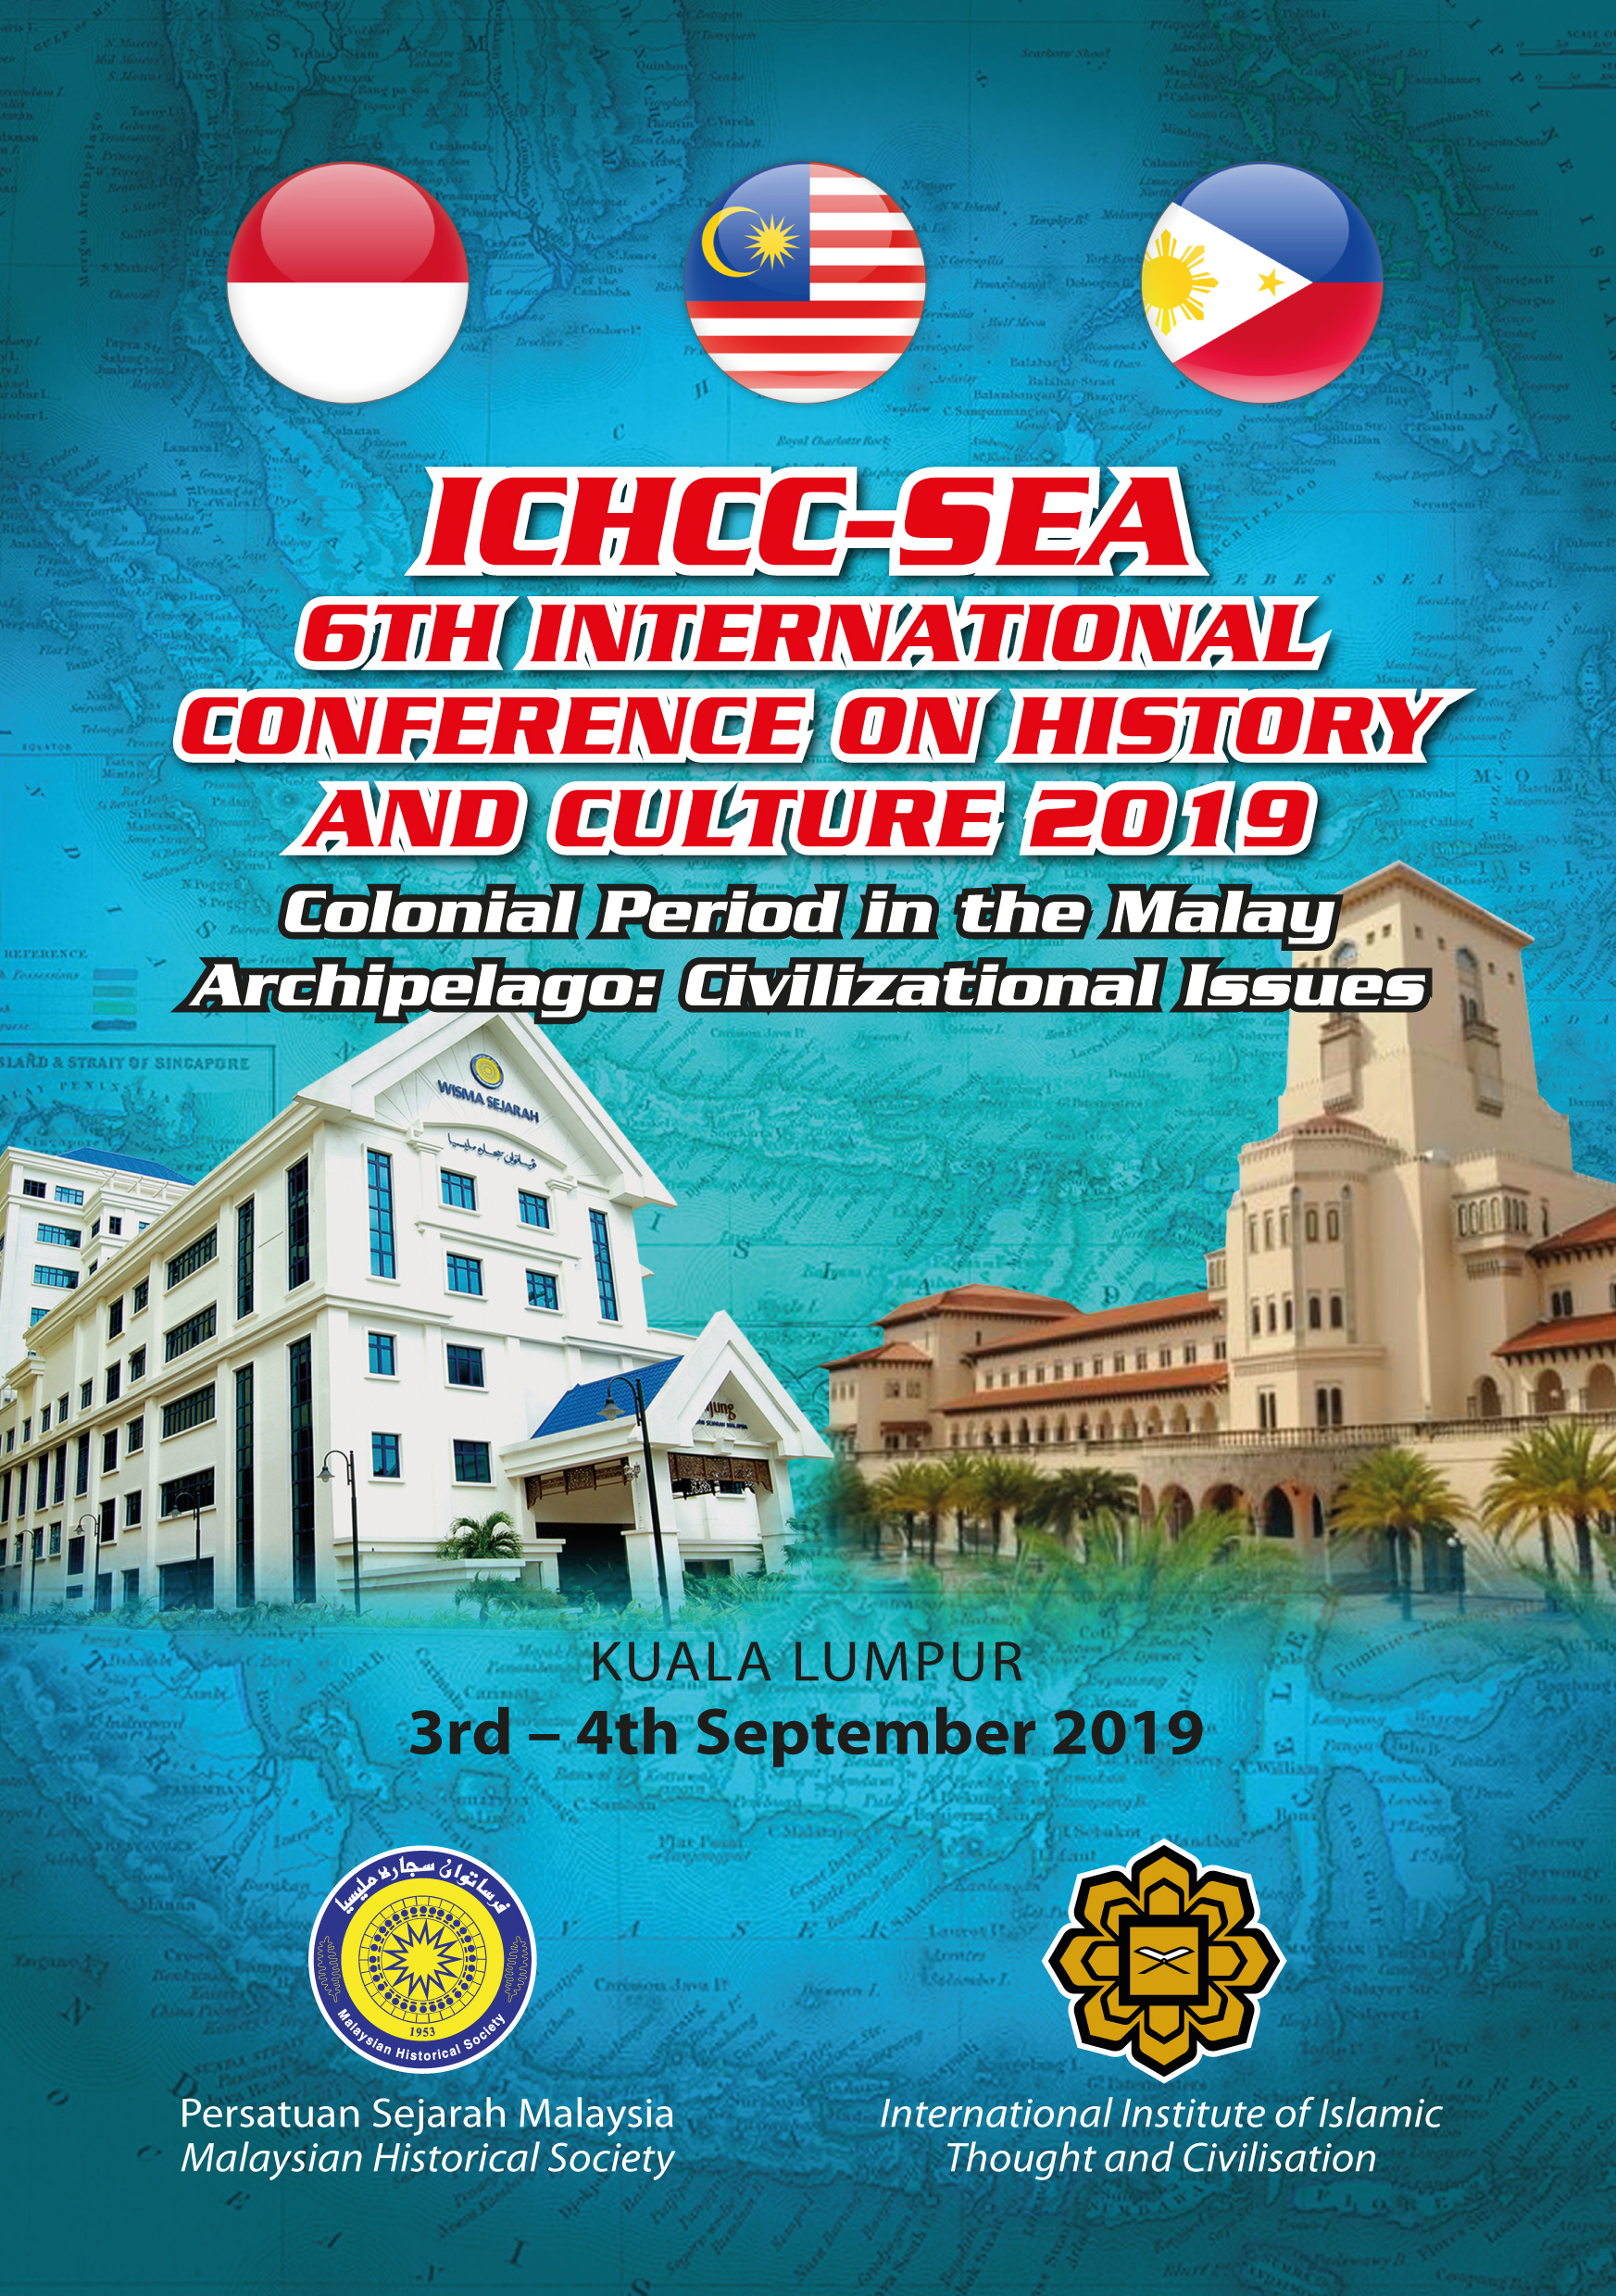 6TH INTERNATIONAL CONFERENCE ON HISTORY AND CULTURE